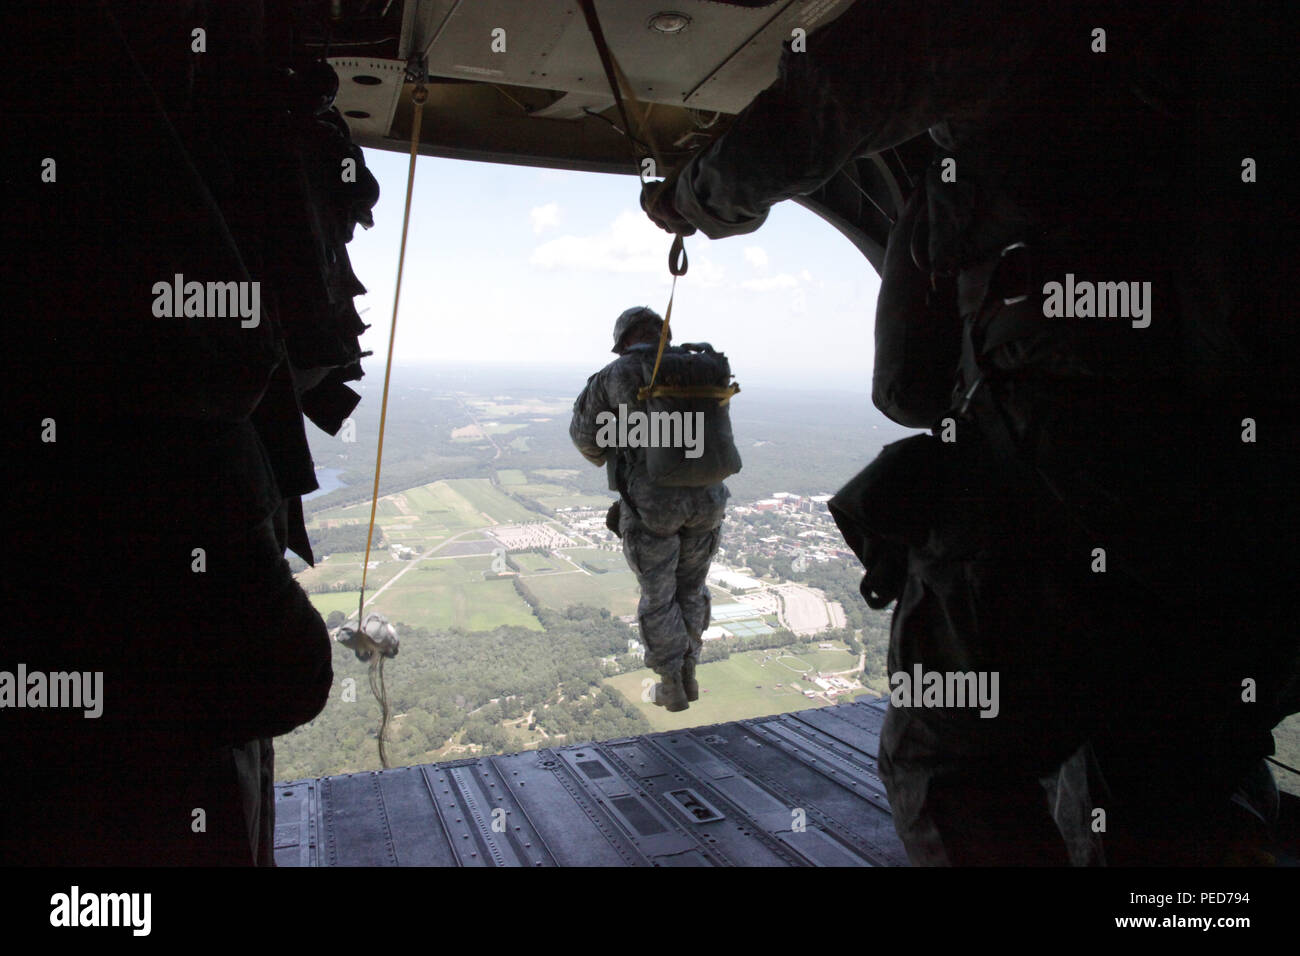 A U.S. Army paratrooper jumps from a CH-47 Chinook helicopter at Leapfest during the wing exchange jump in West Kingston, R.I., Aug. 3, 2015. Leapfest is an International parachute competition hosted by the 56th Troop Command, Rhode Island National Guard to promote high level technical training and esprit de corps within the International Airborne community. (U.S. Army Photo by Spc. Josephine Carlson/Released) Stock Photo